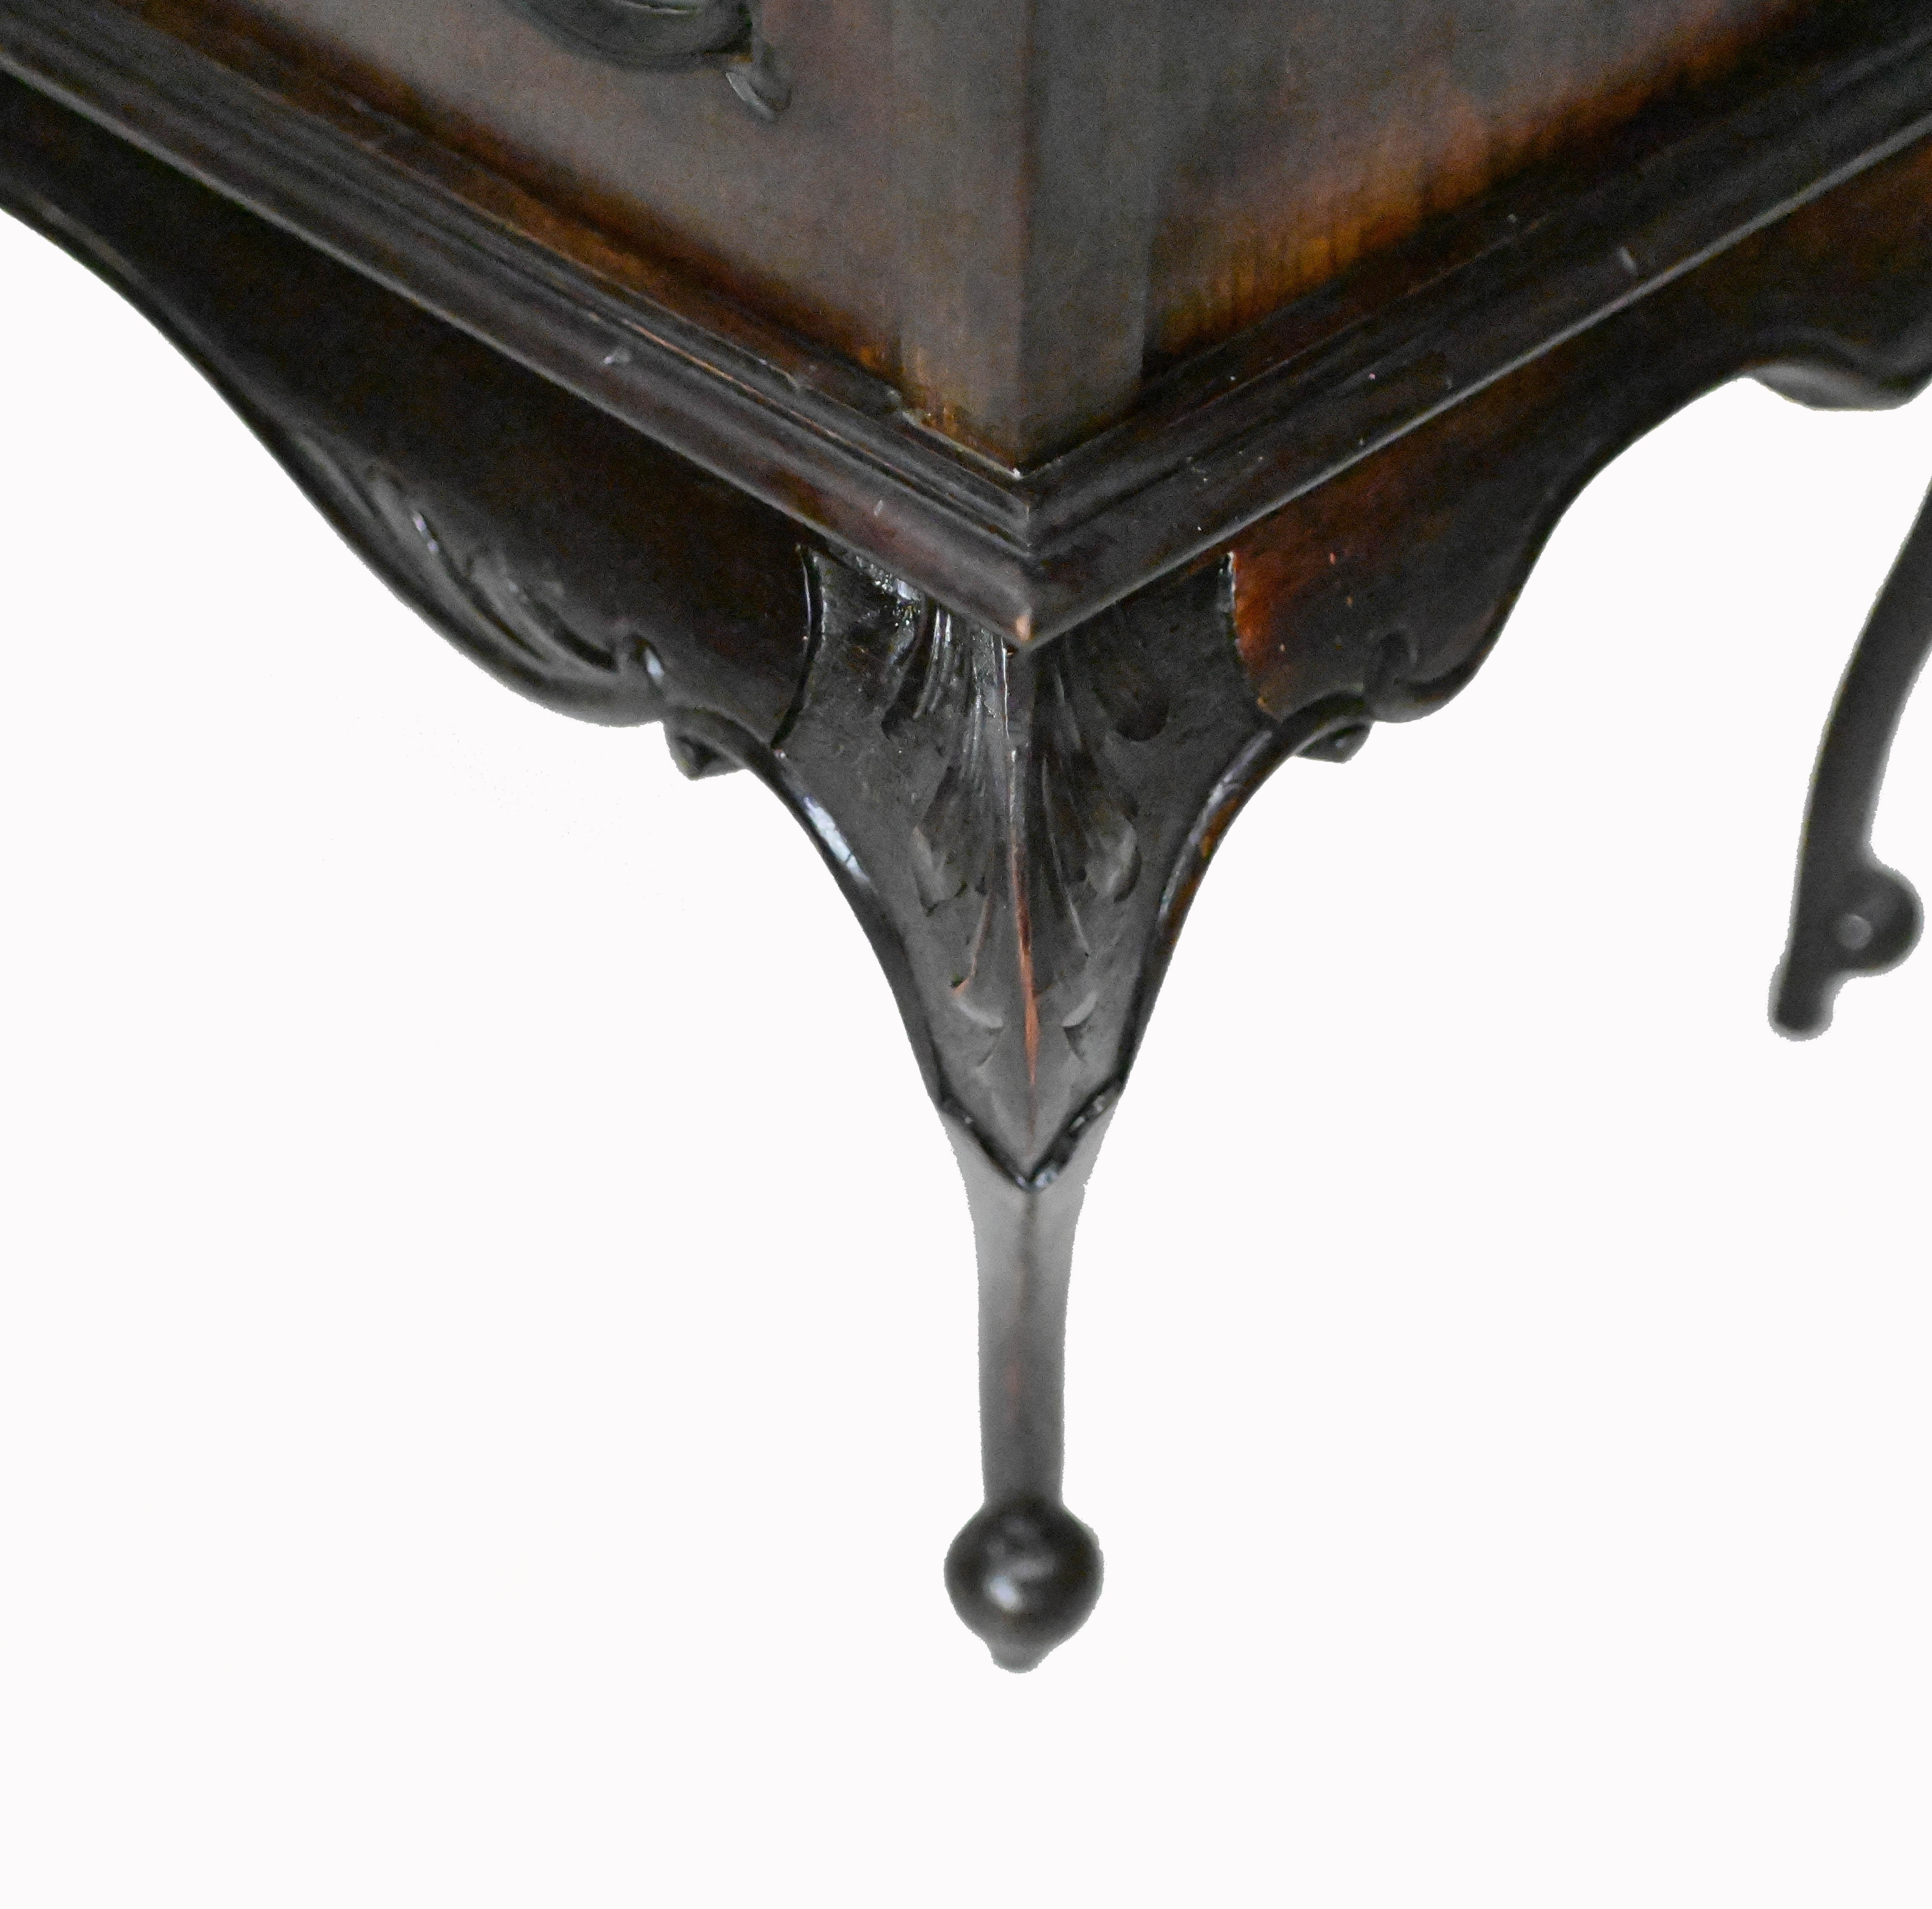 Mirror Art Nouveau Display Cabinet Cocktail Chest Drinks 1890